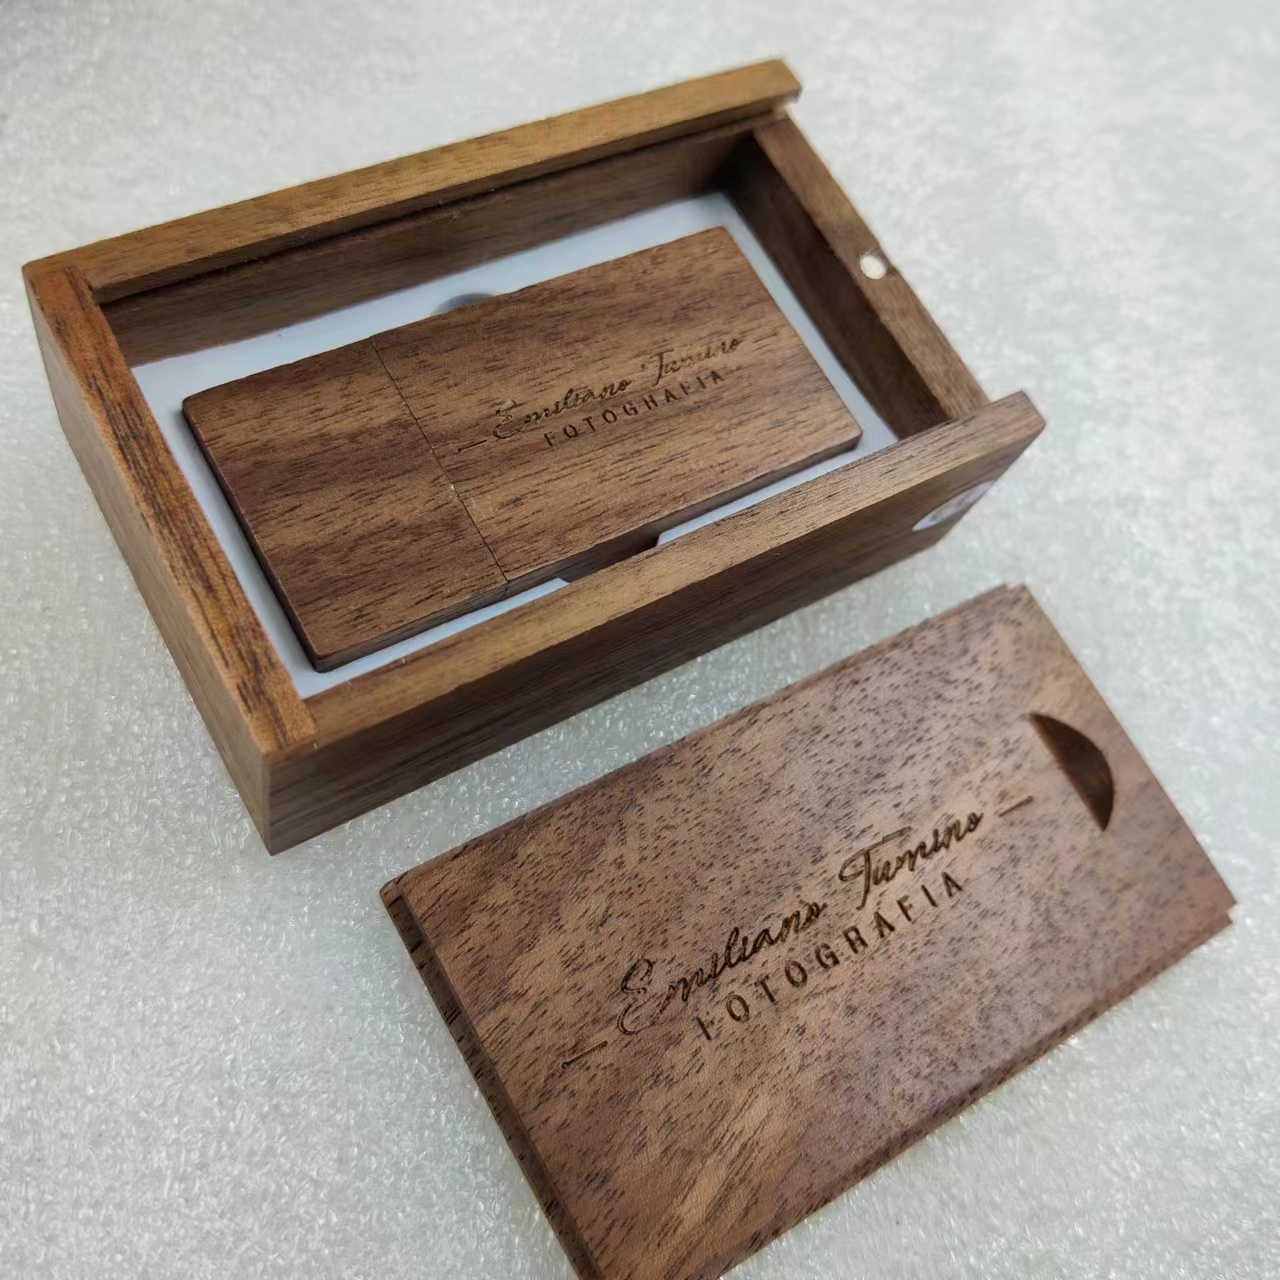 Walnut wooden Usb drives and boxes